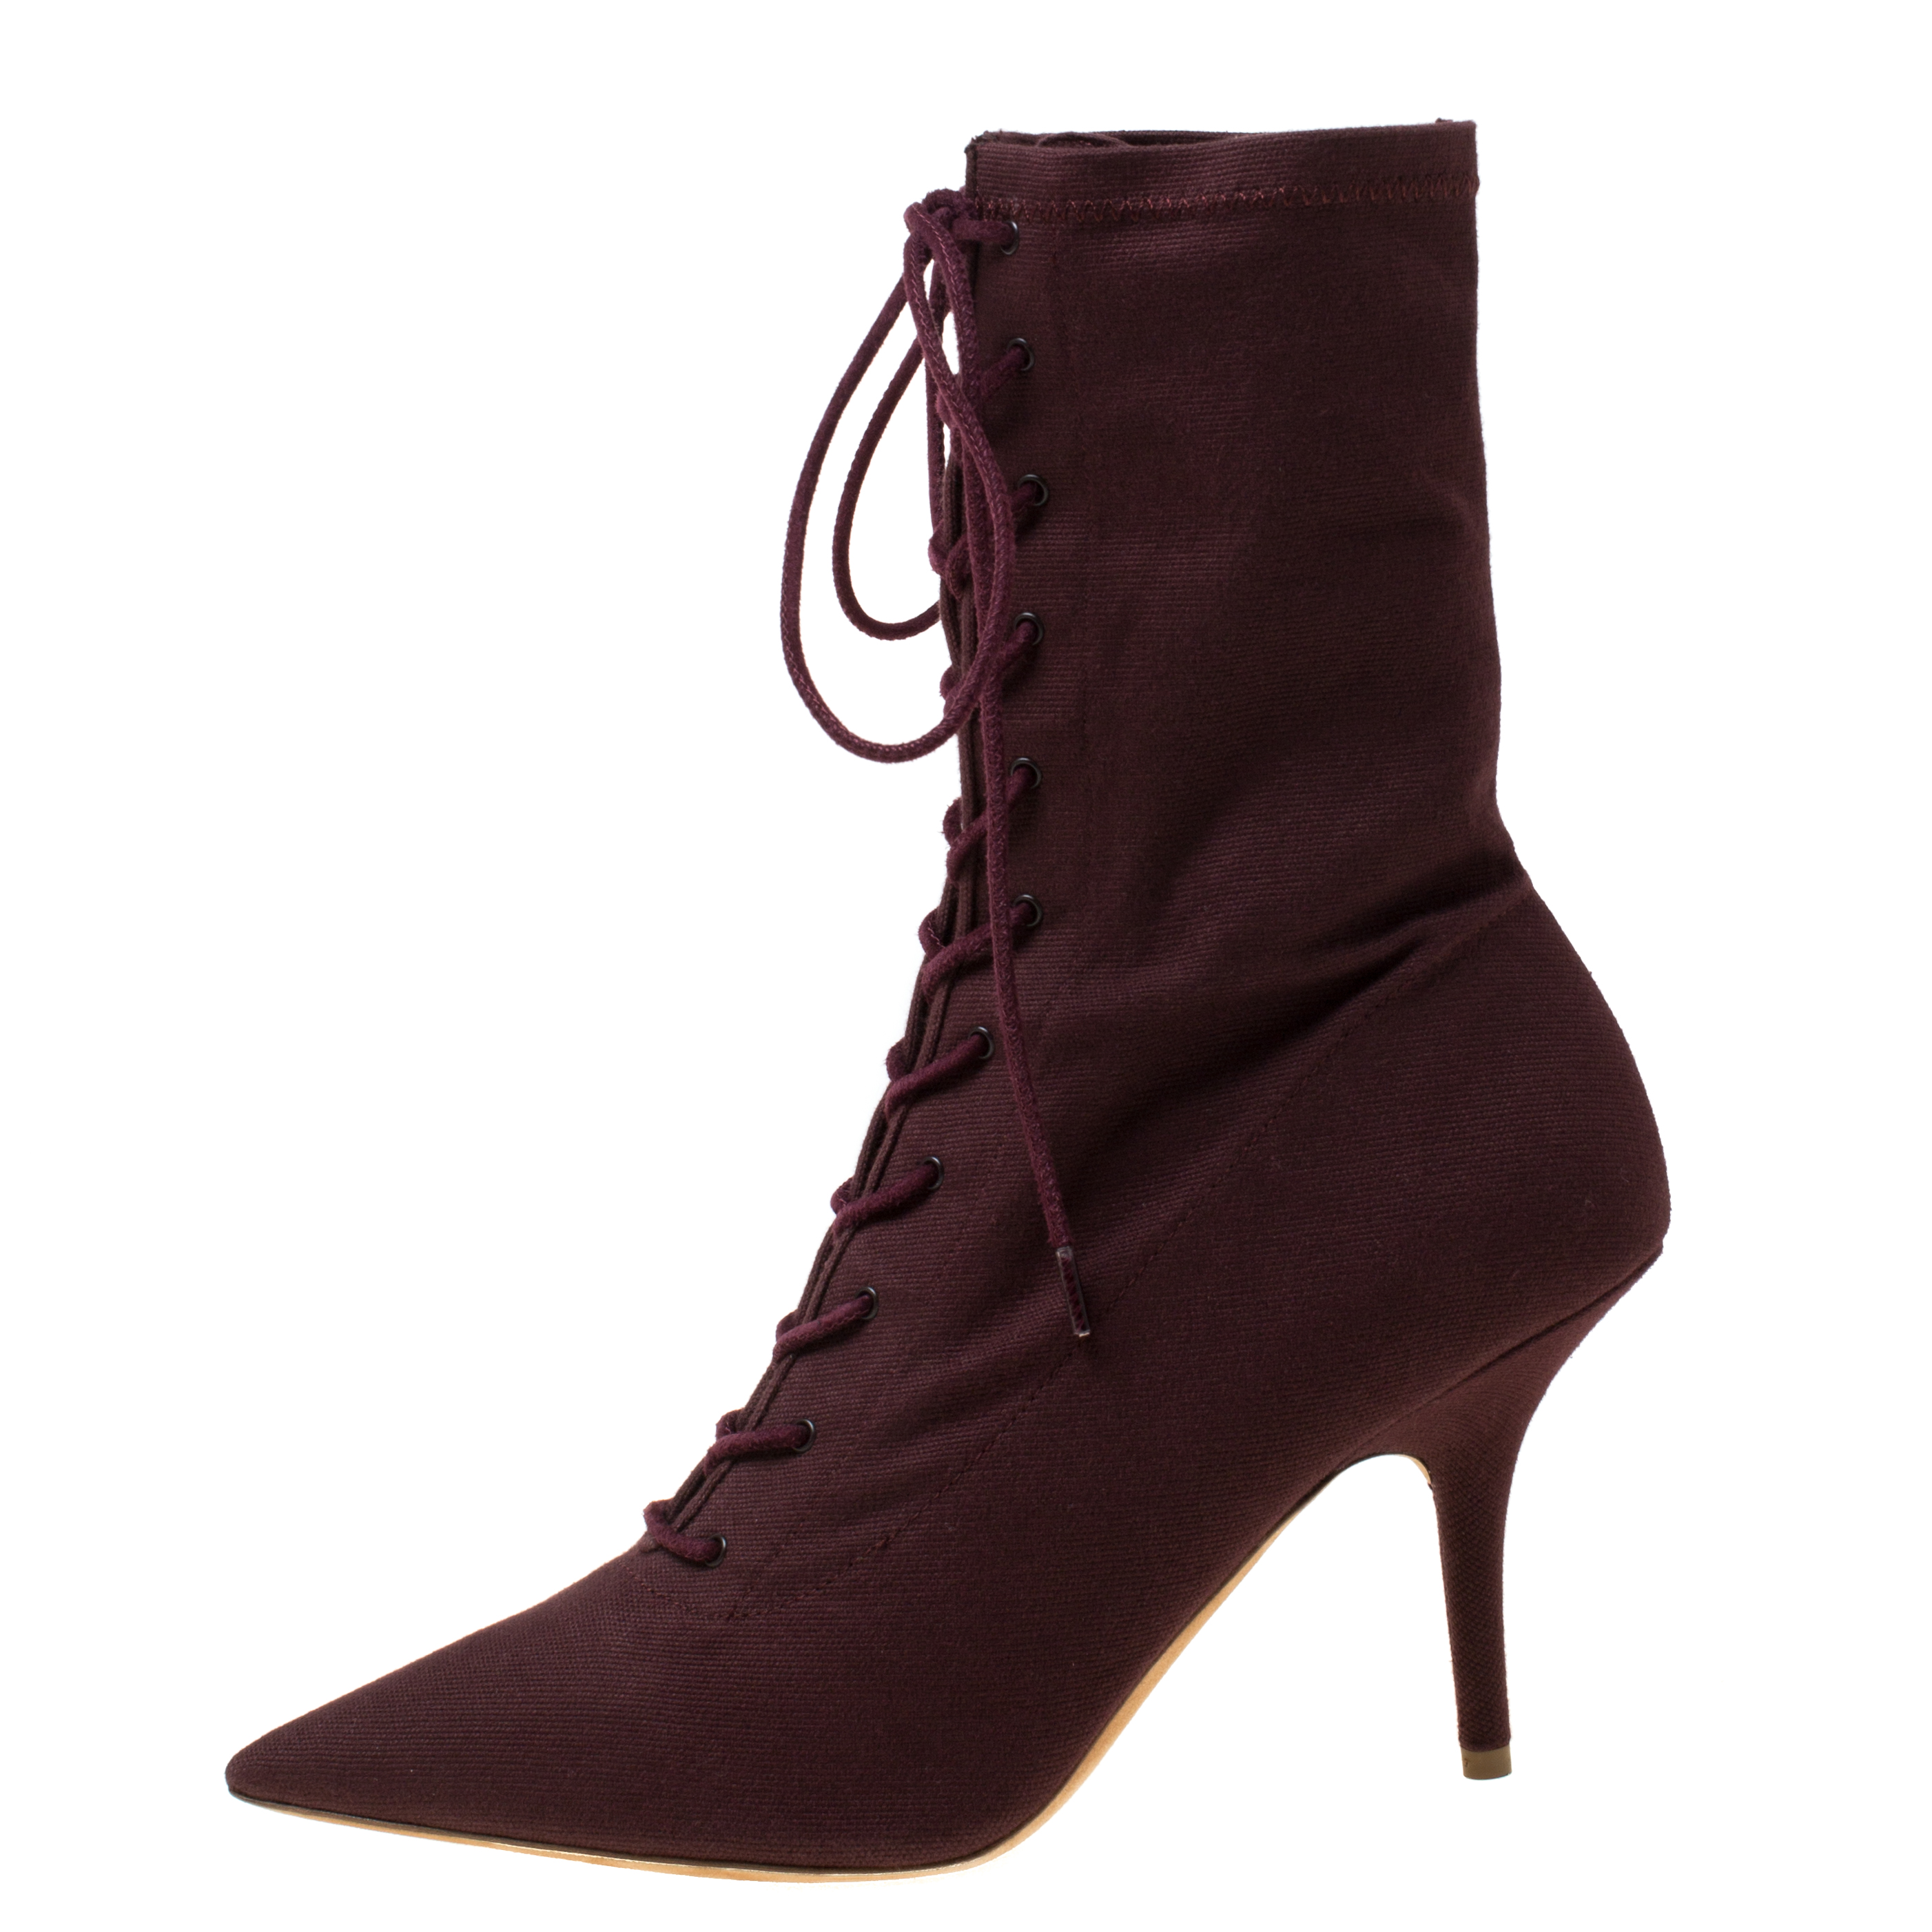 

Yeezy Season 5 Burgundy Stretch Canvas Lace Up Pointed Toe Boots Size